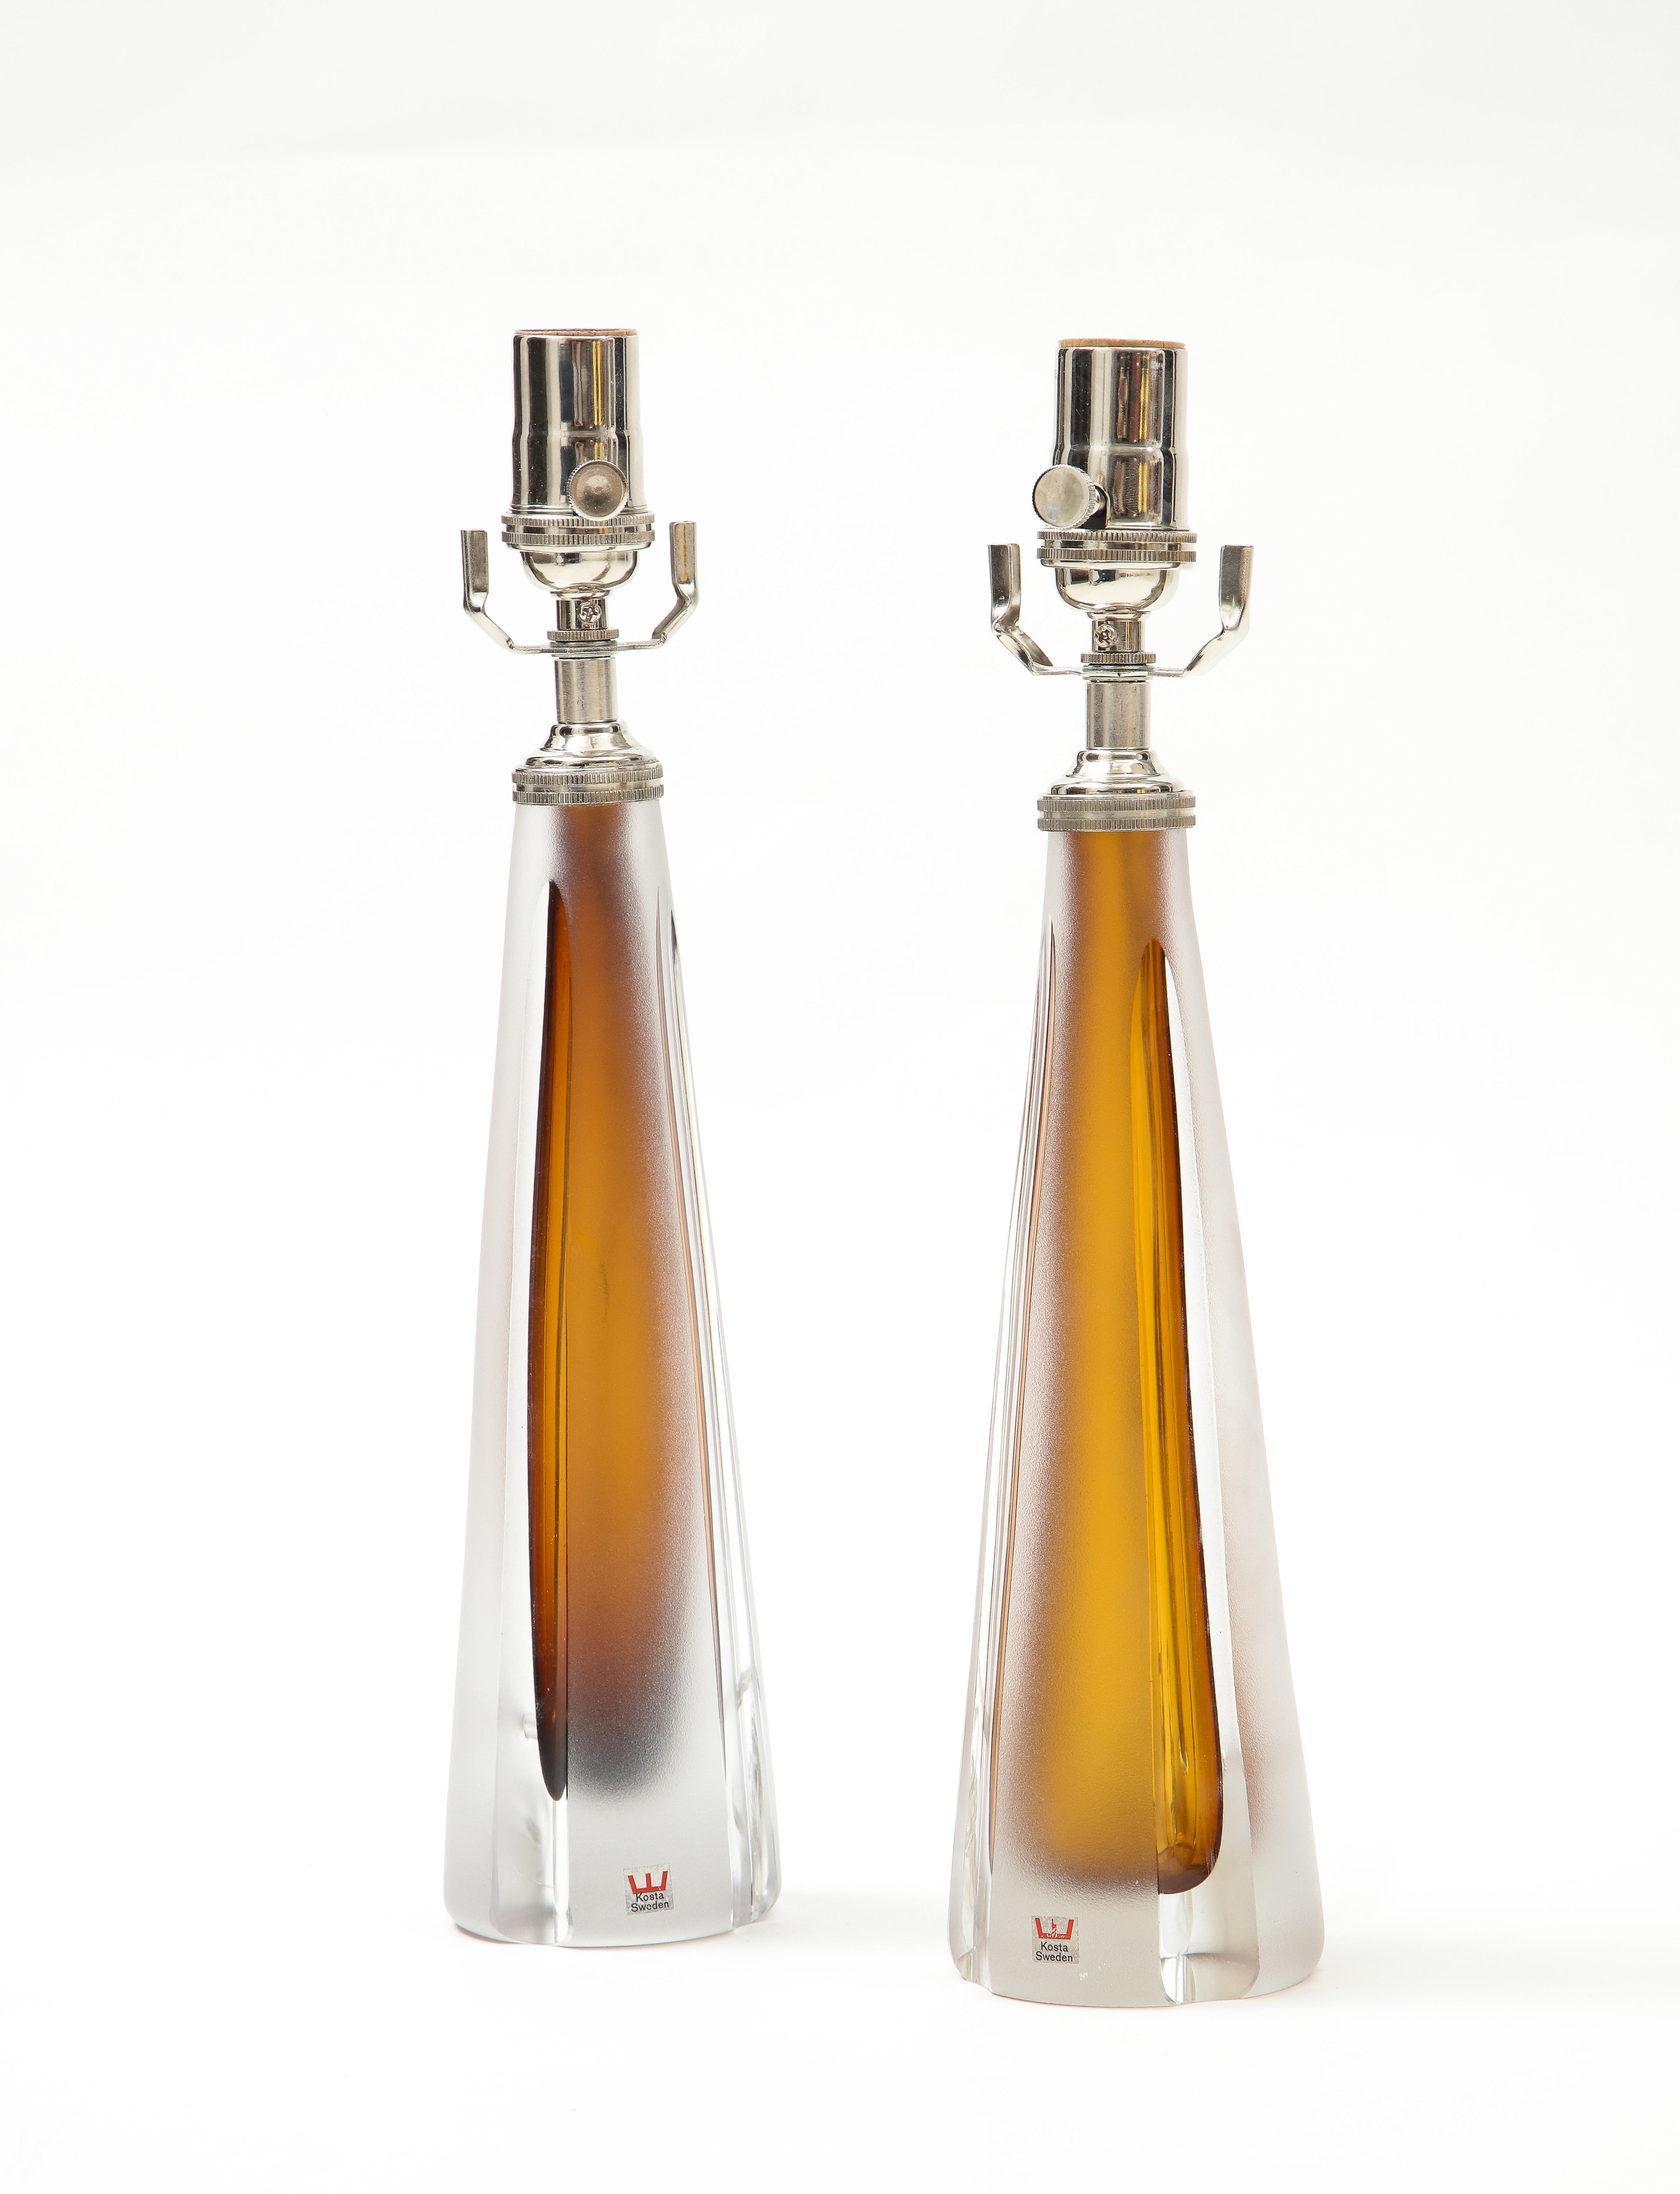 Beautiful pair of Perfume bottle shaped lamps in a stunning Cognac frosted colored glass which 
is paired with a smooth clear glass.
the lamps have been Newly rewired for the US with polished Chrome fittings and they take a
standard size light